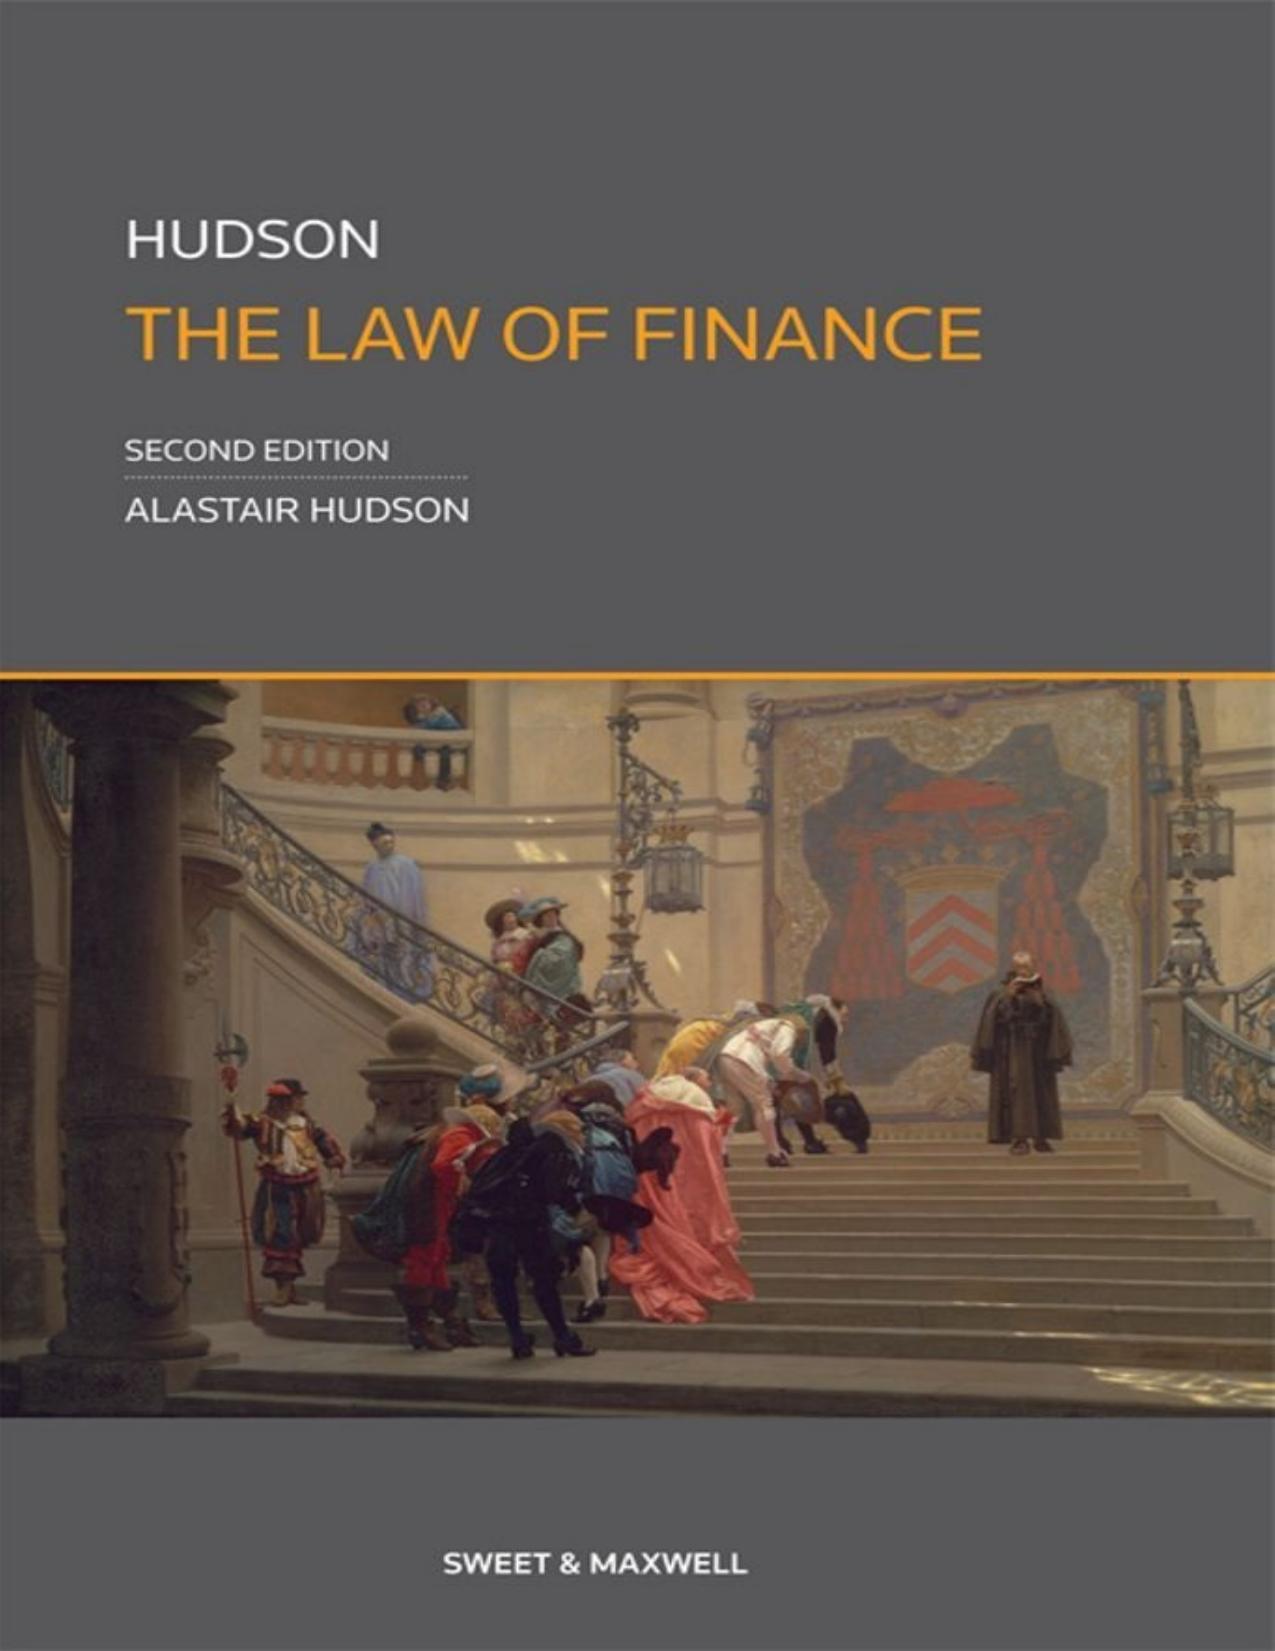 Hudson The Law of Finance 2nd Edition by Alastair Hudson.jpg